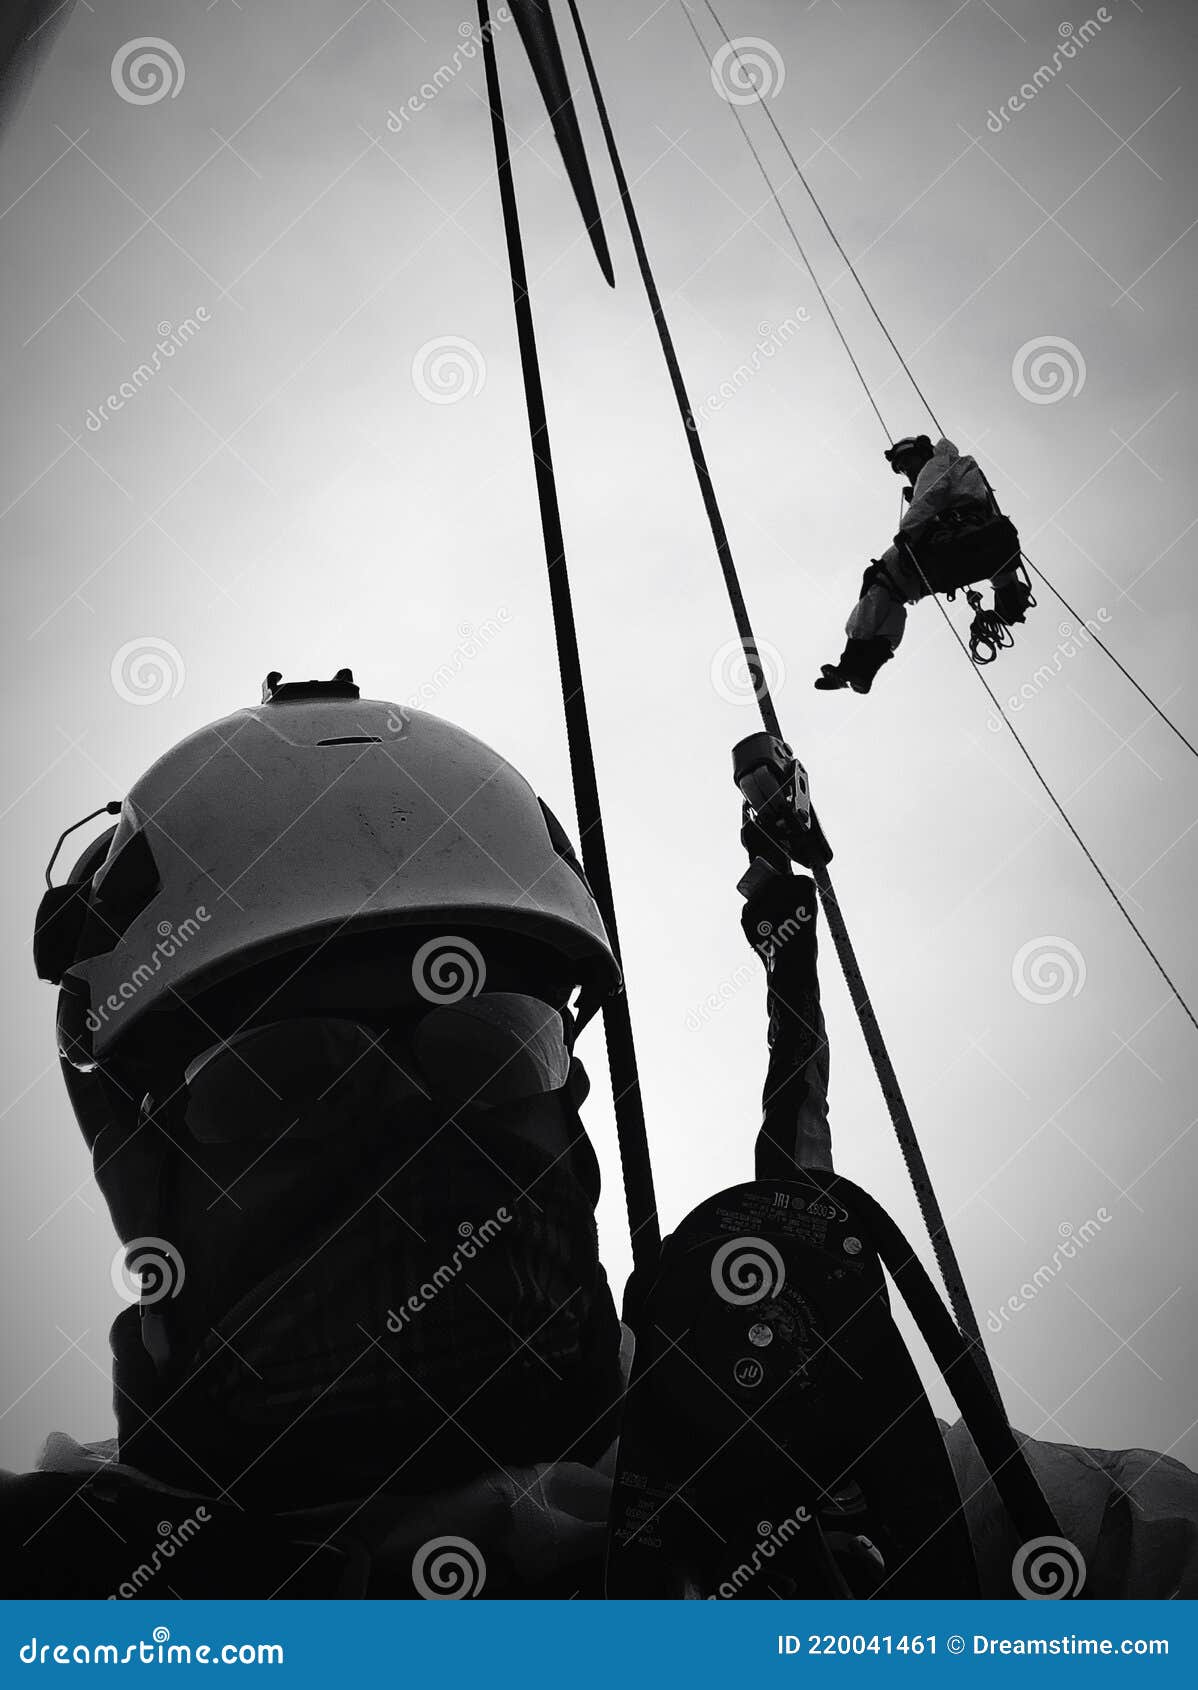 Rope access work stock image. Image of photograph, work - 220041461